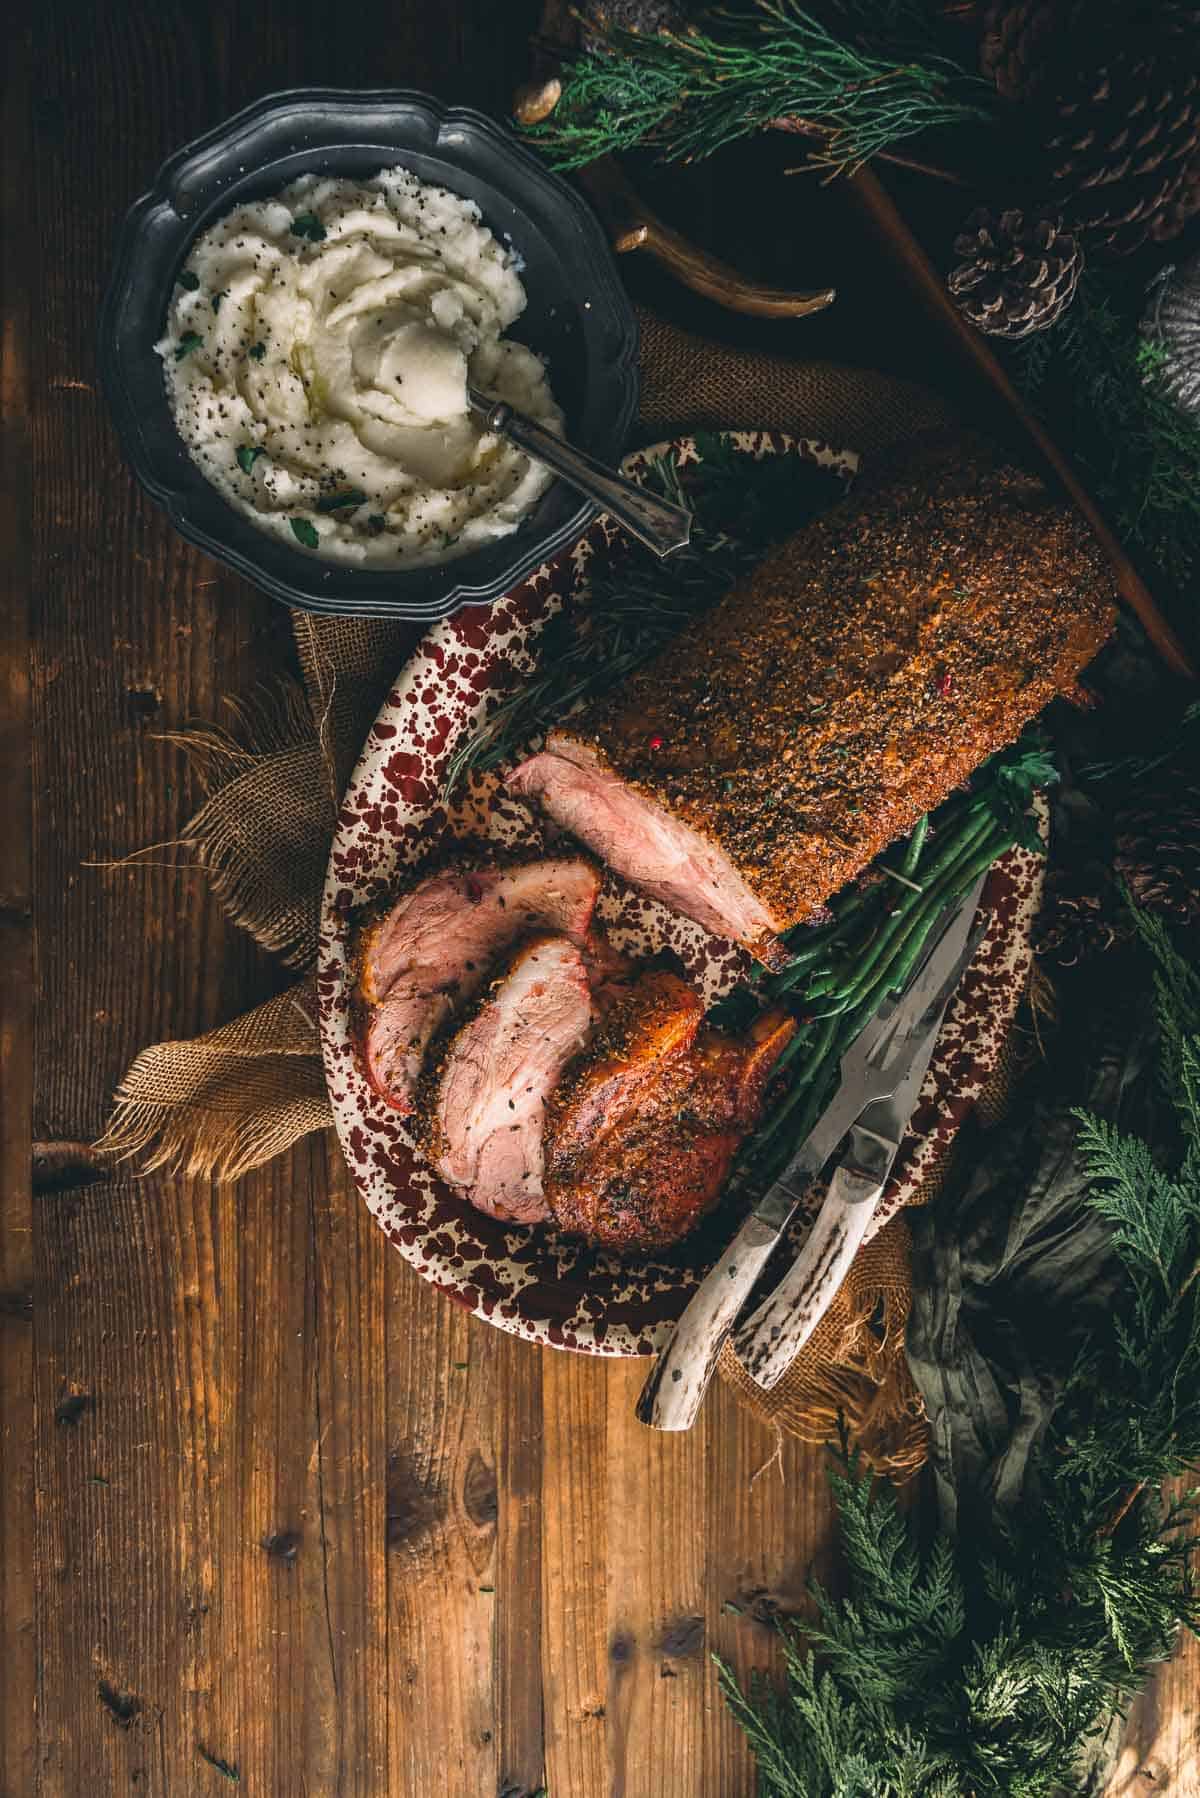 A platter of smoked rack of pork and mashed potatoes on a wooden table.